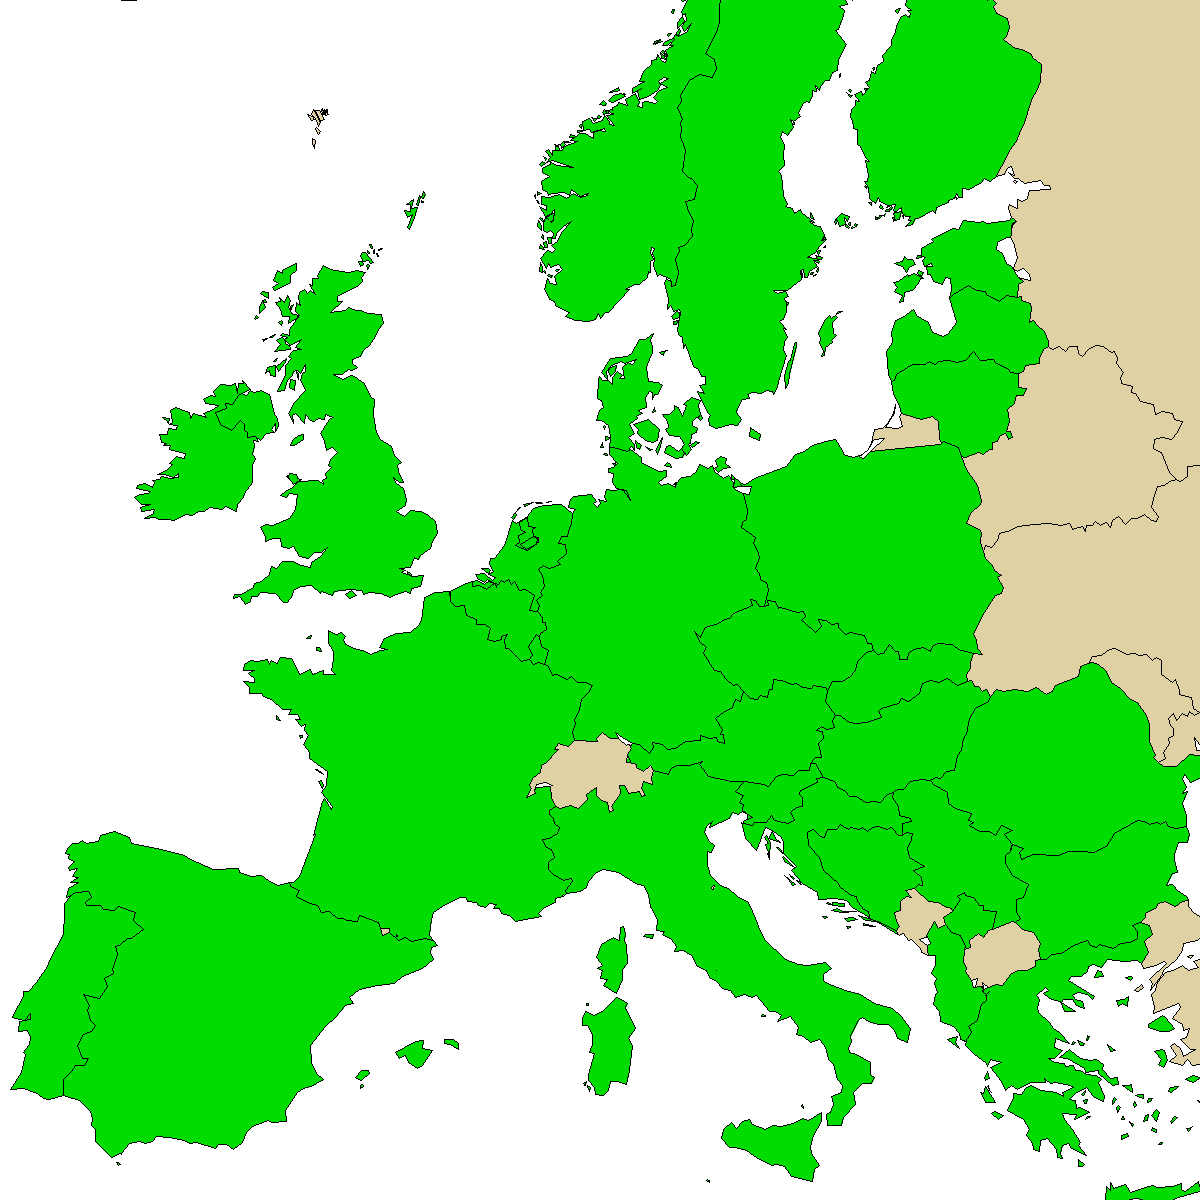 legal info map for our product CBD, green are countries where we found no ban, red with ban, grey is unknown